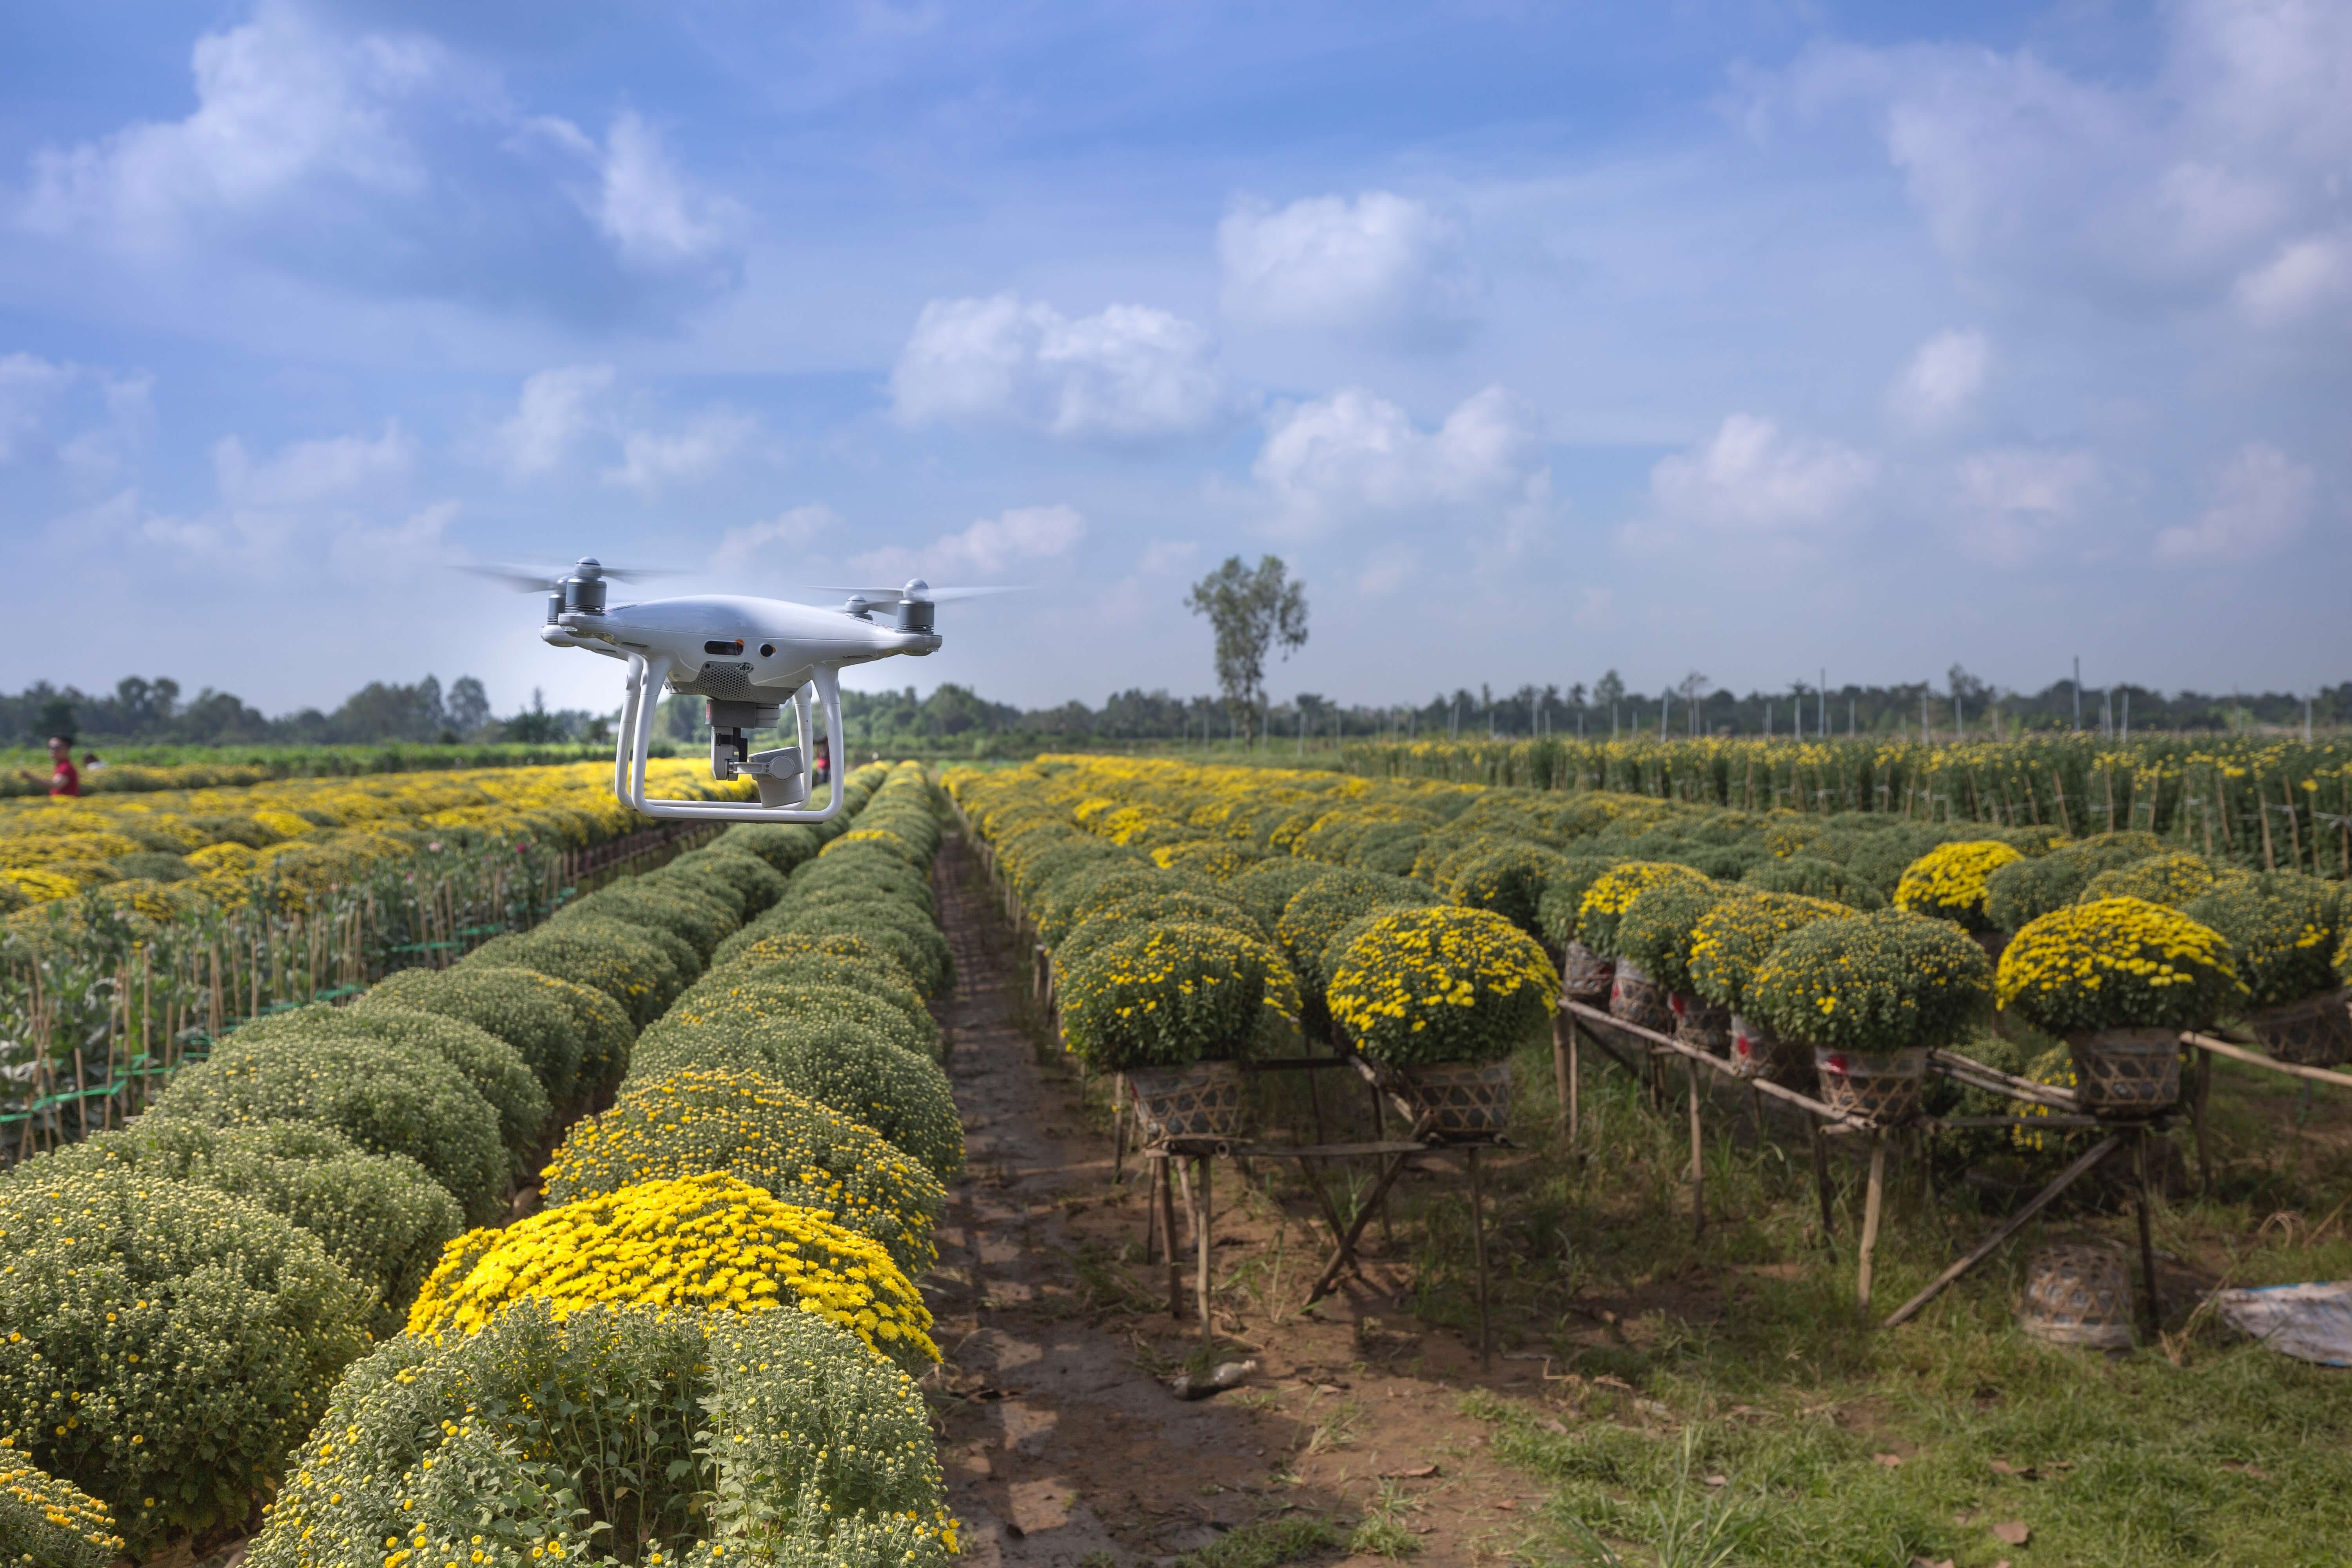 Artificial Intelligence in Agriculture: The Production Method of the Future